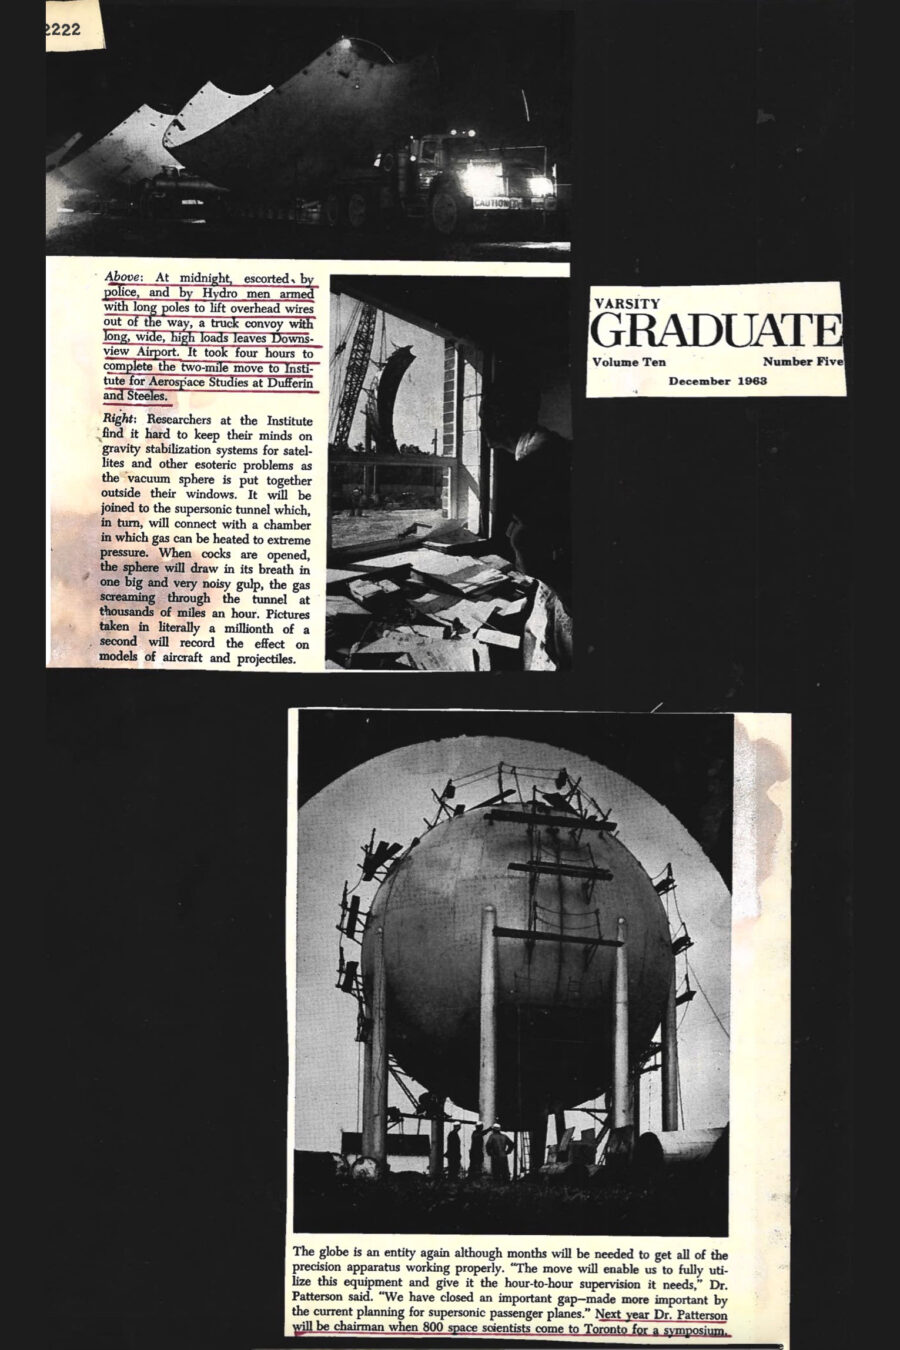 Newspaper clipping from Varsity Graduate, Volume Ten, Number Five, December, 1963
Headline: None
Photo 1 in clipping: Image of a heavy flatbed truck at night transporting large sections of the vacuum sphere to its new location at the University of Toronto Institute for Aerospace Studies.
Caption: At midnight, escorted by police and by Hydro men armed with long poles to lift overhead wires out of the way, a truck convoy transported large sections of the University of Toronto Institute for Aerospace Studies’ vacuum sphere from Downsview Airport. It took four hours to complete the two-mile move to the institute’s new location at Dufferin and Steeles.
Photo 2 in clipping: Image of a man in his office looking out a window at the construction assembly of the vacuum sphere, a large crane in the distance lifting one of the sphere’s sections into the air.
Caption: Researchers at the institute find it hard to keep their minds on gravity stabilization systems for satellite and other esoteric problems as the vacuum sphere is put together outside their windows. It will be joined to the supersonic tunnel, which in turn will connect with a chamber in which gas can be heated to extreme pressure. When cocks are opened, the sphere will draw in its breath in one big and very noisy gulp, the gas screaming through the tunnel at thousands of miles per hour. Pictures taken in a millionth of a second record the effect on models of aircraft and projectiles.
Photo 3 in clipping: Image of the finished assembly of the vacuum sphere, large sensors mounted about its exterior, the sphere dwarfing three men in hardhats standing at its base
Caption: The globe is an entity again although months will be needed to get all of the precision apparatus working properly. “The move will enable us to fully utilize this equipment and give it the hour-to-hour supervision it needs,” Doctor Patterson said. “We have closed an important gap – made more important by the current planning for supersonic passenger planes.” Next year Doctor Patterson will be chairman when 800 space scientists come to Toronto for a symposium.
The article outlines the move of the University of Toronto Institute for Aerospace Studies’ vacuum sphere from Downsview Airport. At midnight, escorted by police and by Hydro men armed with long poles to lift overhead wires out of the way, a truck convoy transported large sections of the vacuum sphere. It took four hours to complete the two-mile move to the institute’s new location at Dufferin and Steeles.
Outside researchers’ windows, the vacuum sphere is assembled. It will be joined to the supersonic tunnel, which in turn will connect with a chamber in which gas can be heated to extreme pressure. When cocks are opened, the gas screams through the tunnel at thousands of miles per hour. Pictures taken in a millionth of a second record the effect on models of aircraft and projectiles.
Reassembled, the sphere will need months to get the precision apparatus working properly. Doctor Patterson states “We have closed an important gap – made more important by the current planning for supersonic passenger planes.”